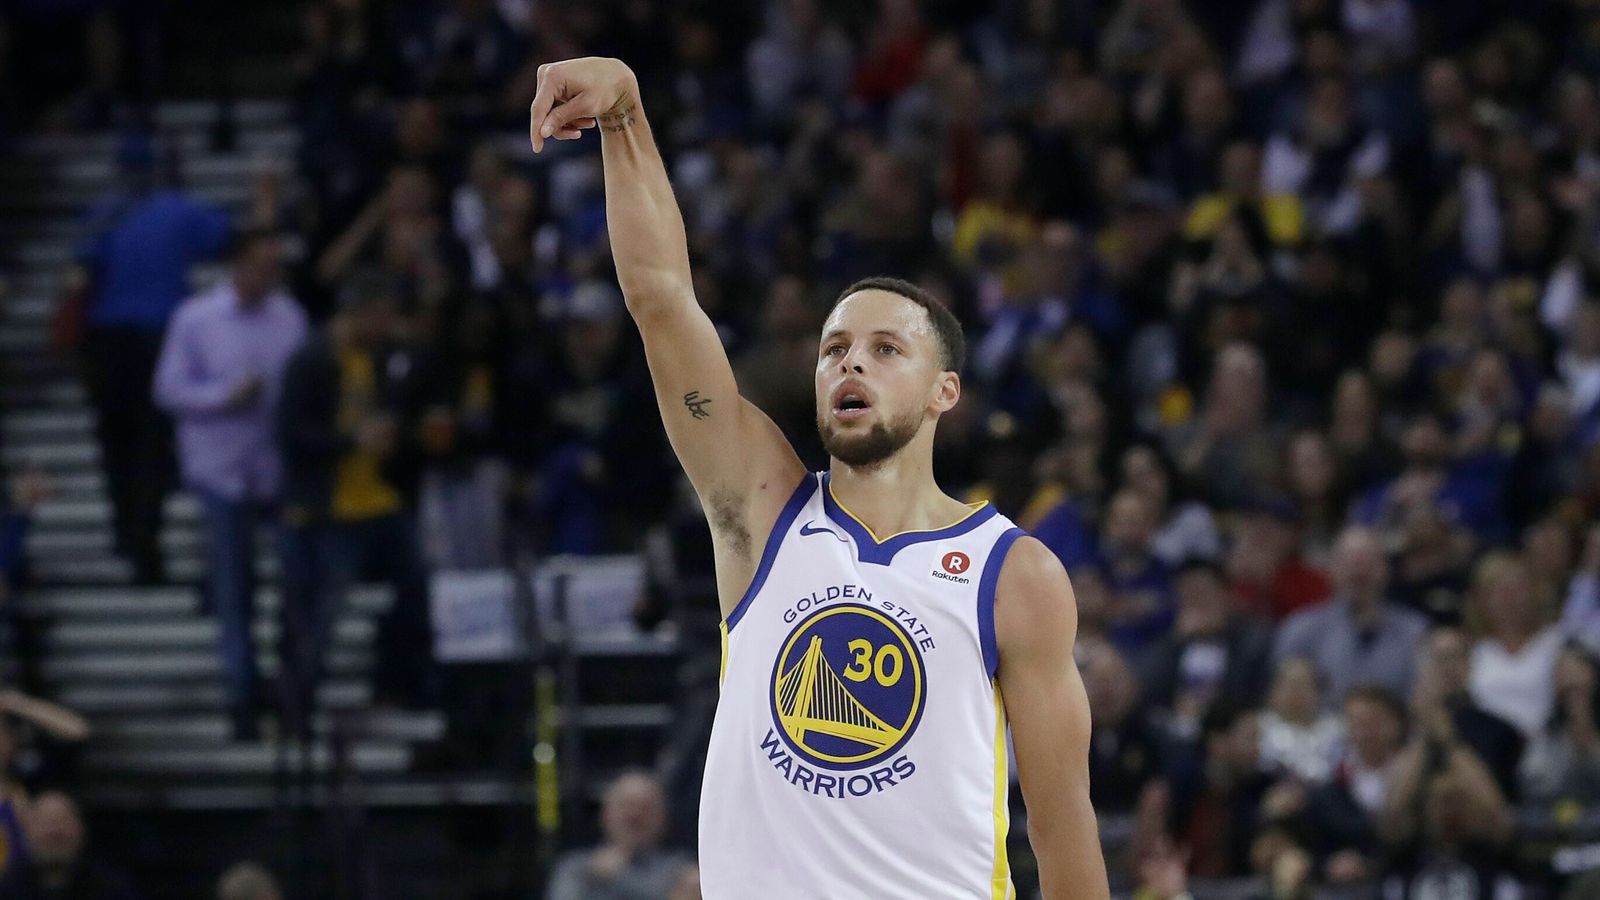 How well do you know Stephen Curry? A look into the personal life